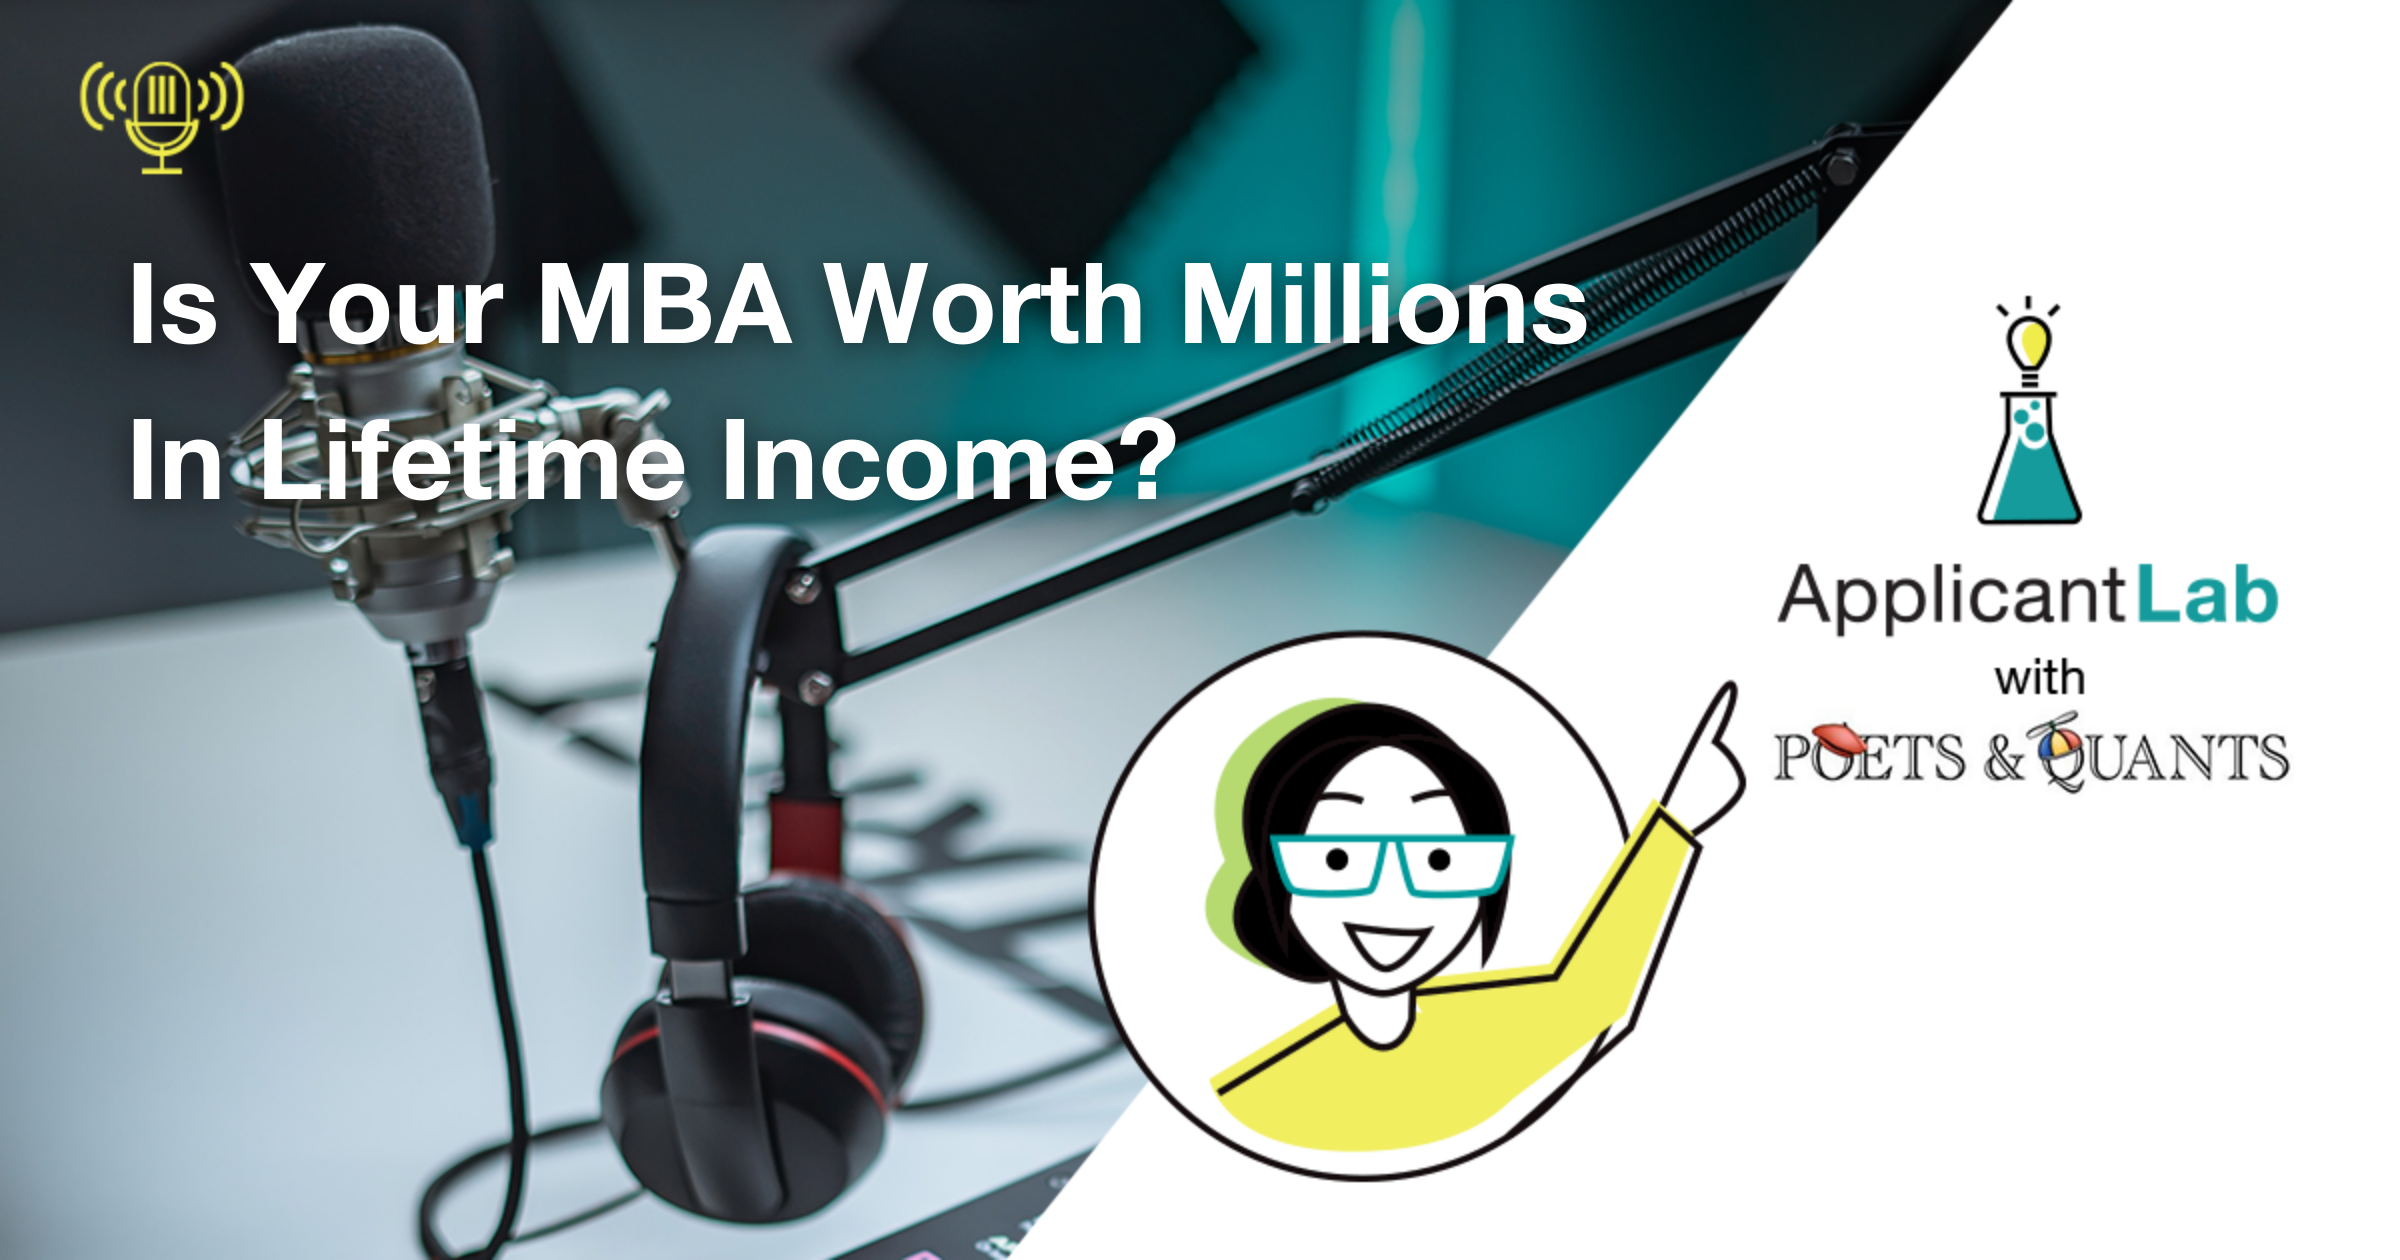 Is Your MBA Worth Millions In Lifetime Income?